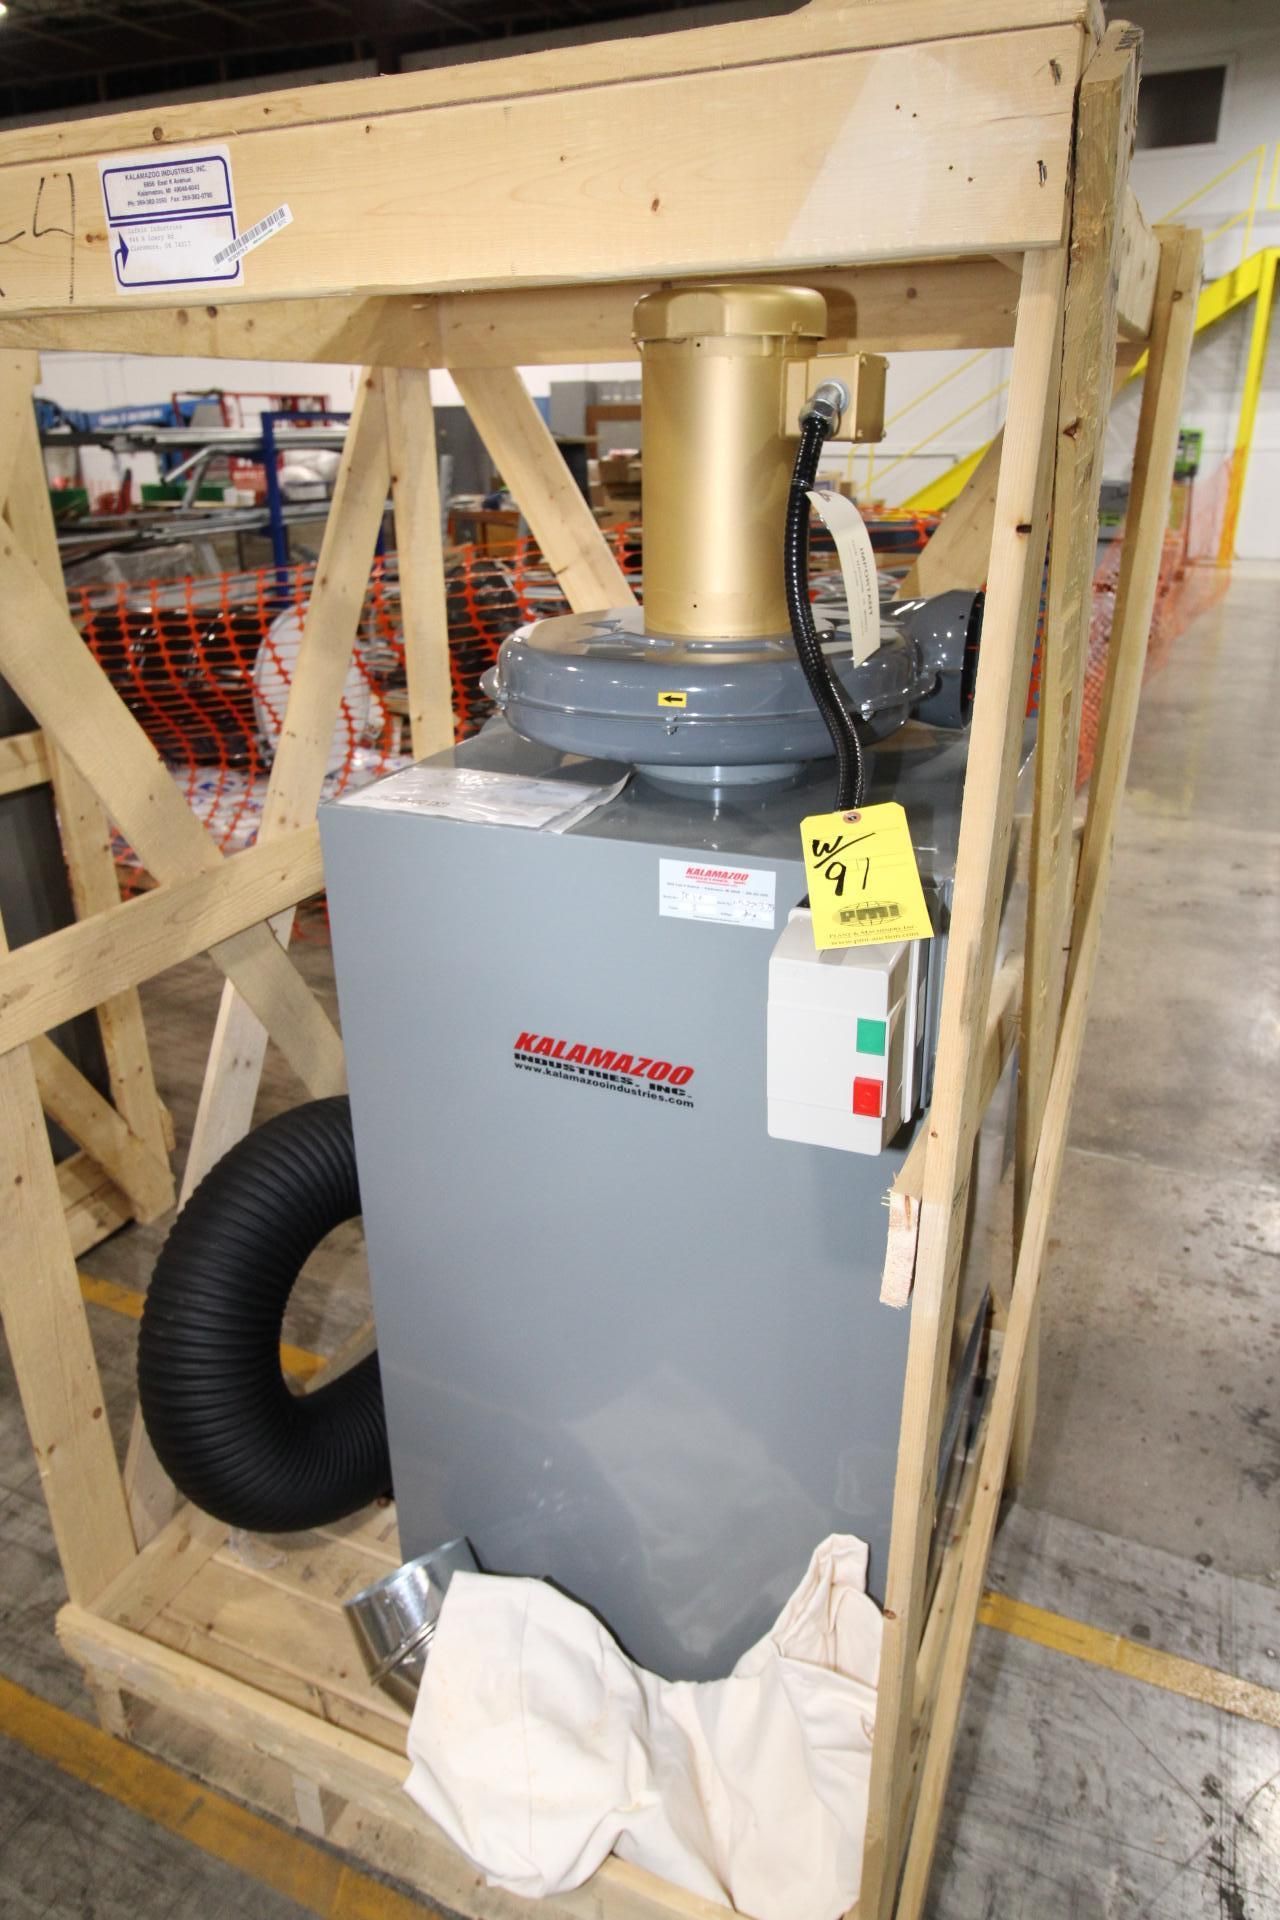 INDUSTRIAL SANDERS W/ DUST COLLECTOR, KALAMAZOO S8D, 8” x 60”, 7.5 HP, w/ dust collection system, - Image 6 of 8